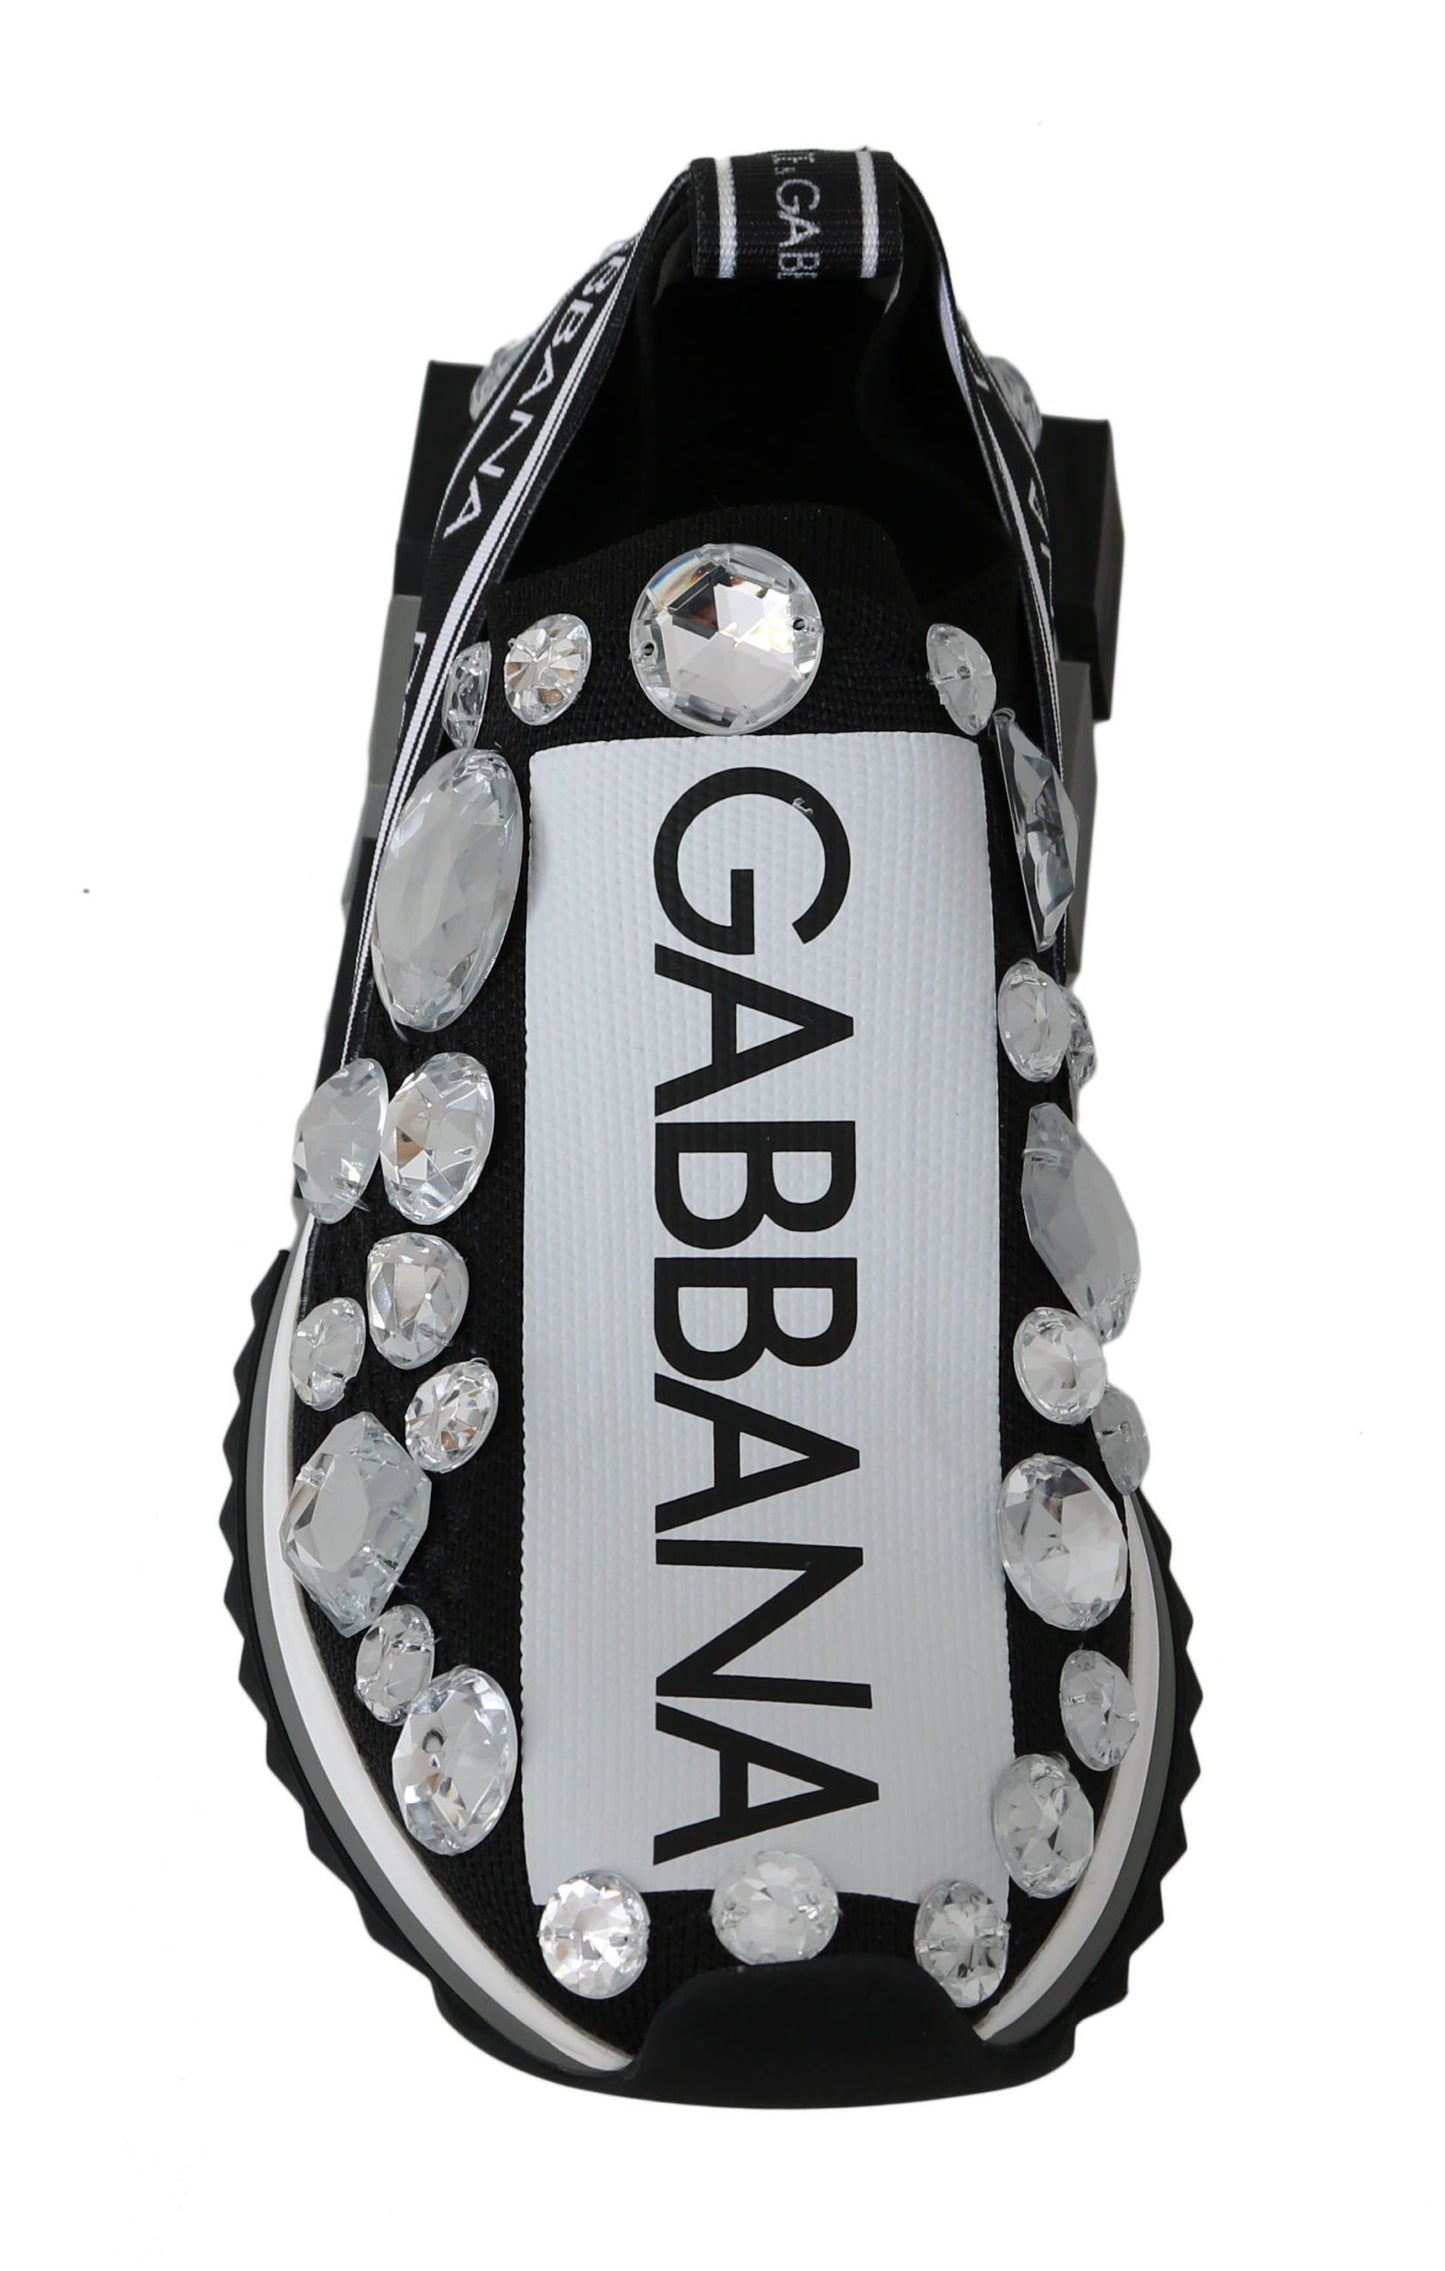 Dolce & Gabbana Black White Crystal Crystal Sneakers Chaussures